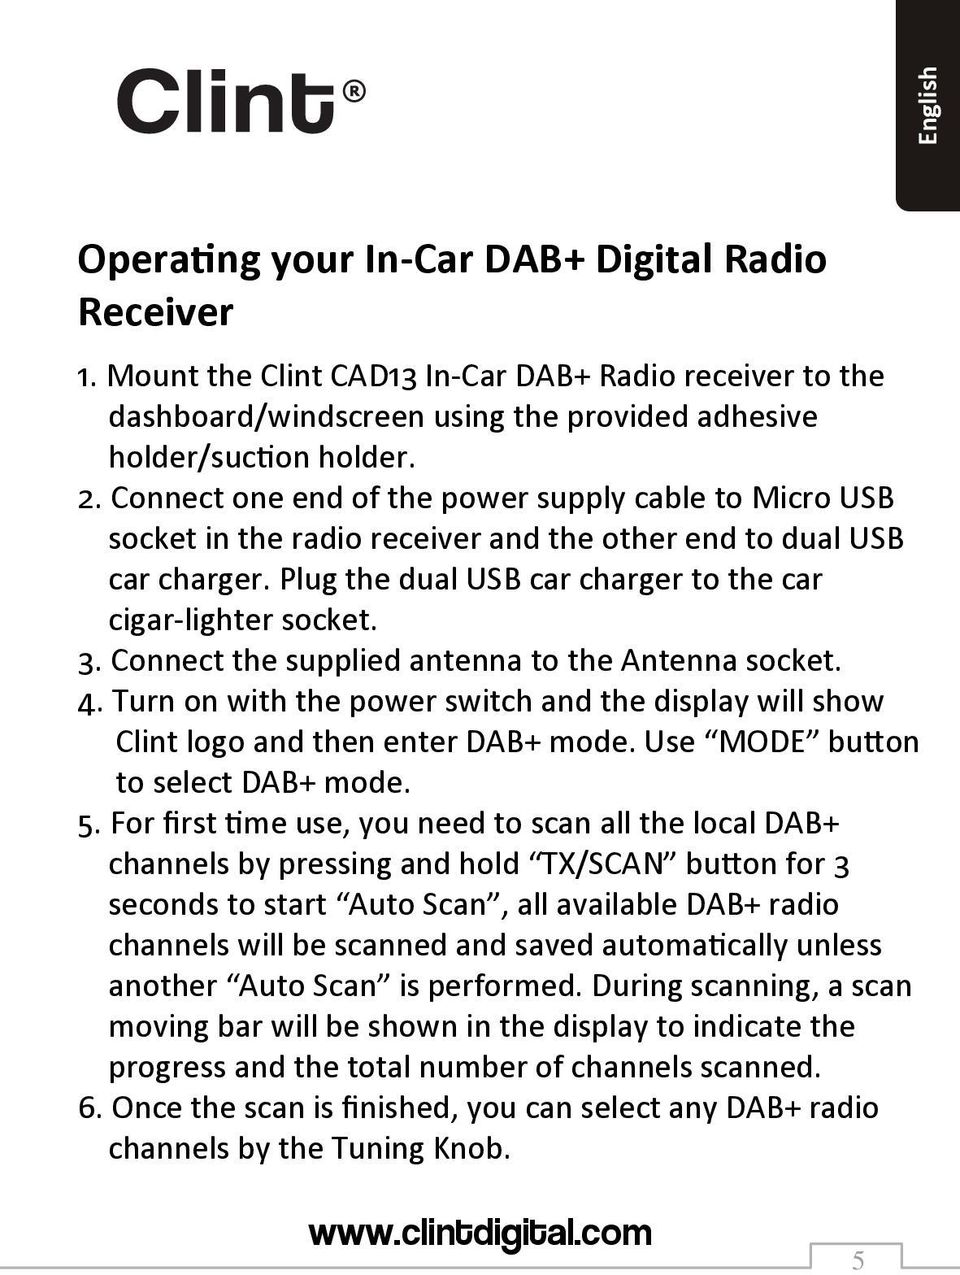 Connect the supplied antenna to the Antenna socket. 4. Turn on with the power switch and the display will show Clint logo and then enter DAB+ mode. Use MODE button to select DAB+ mode. 5.